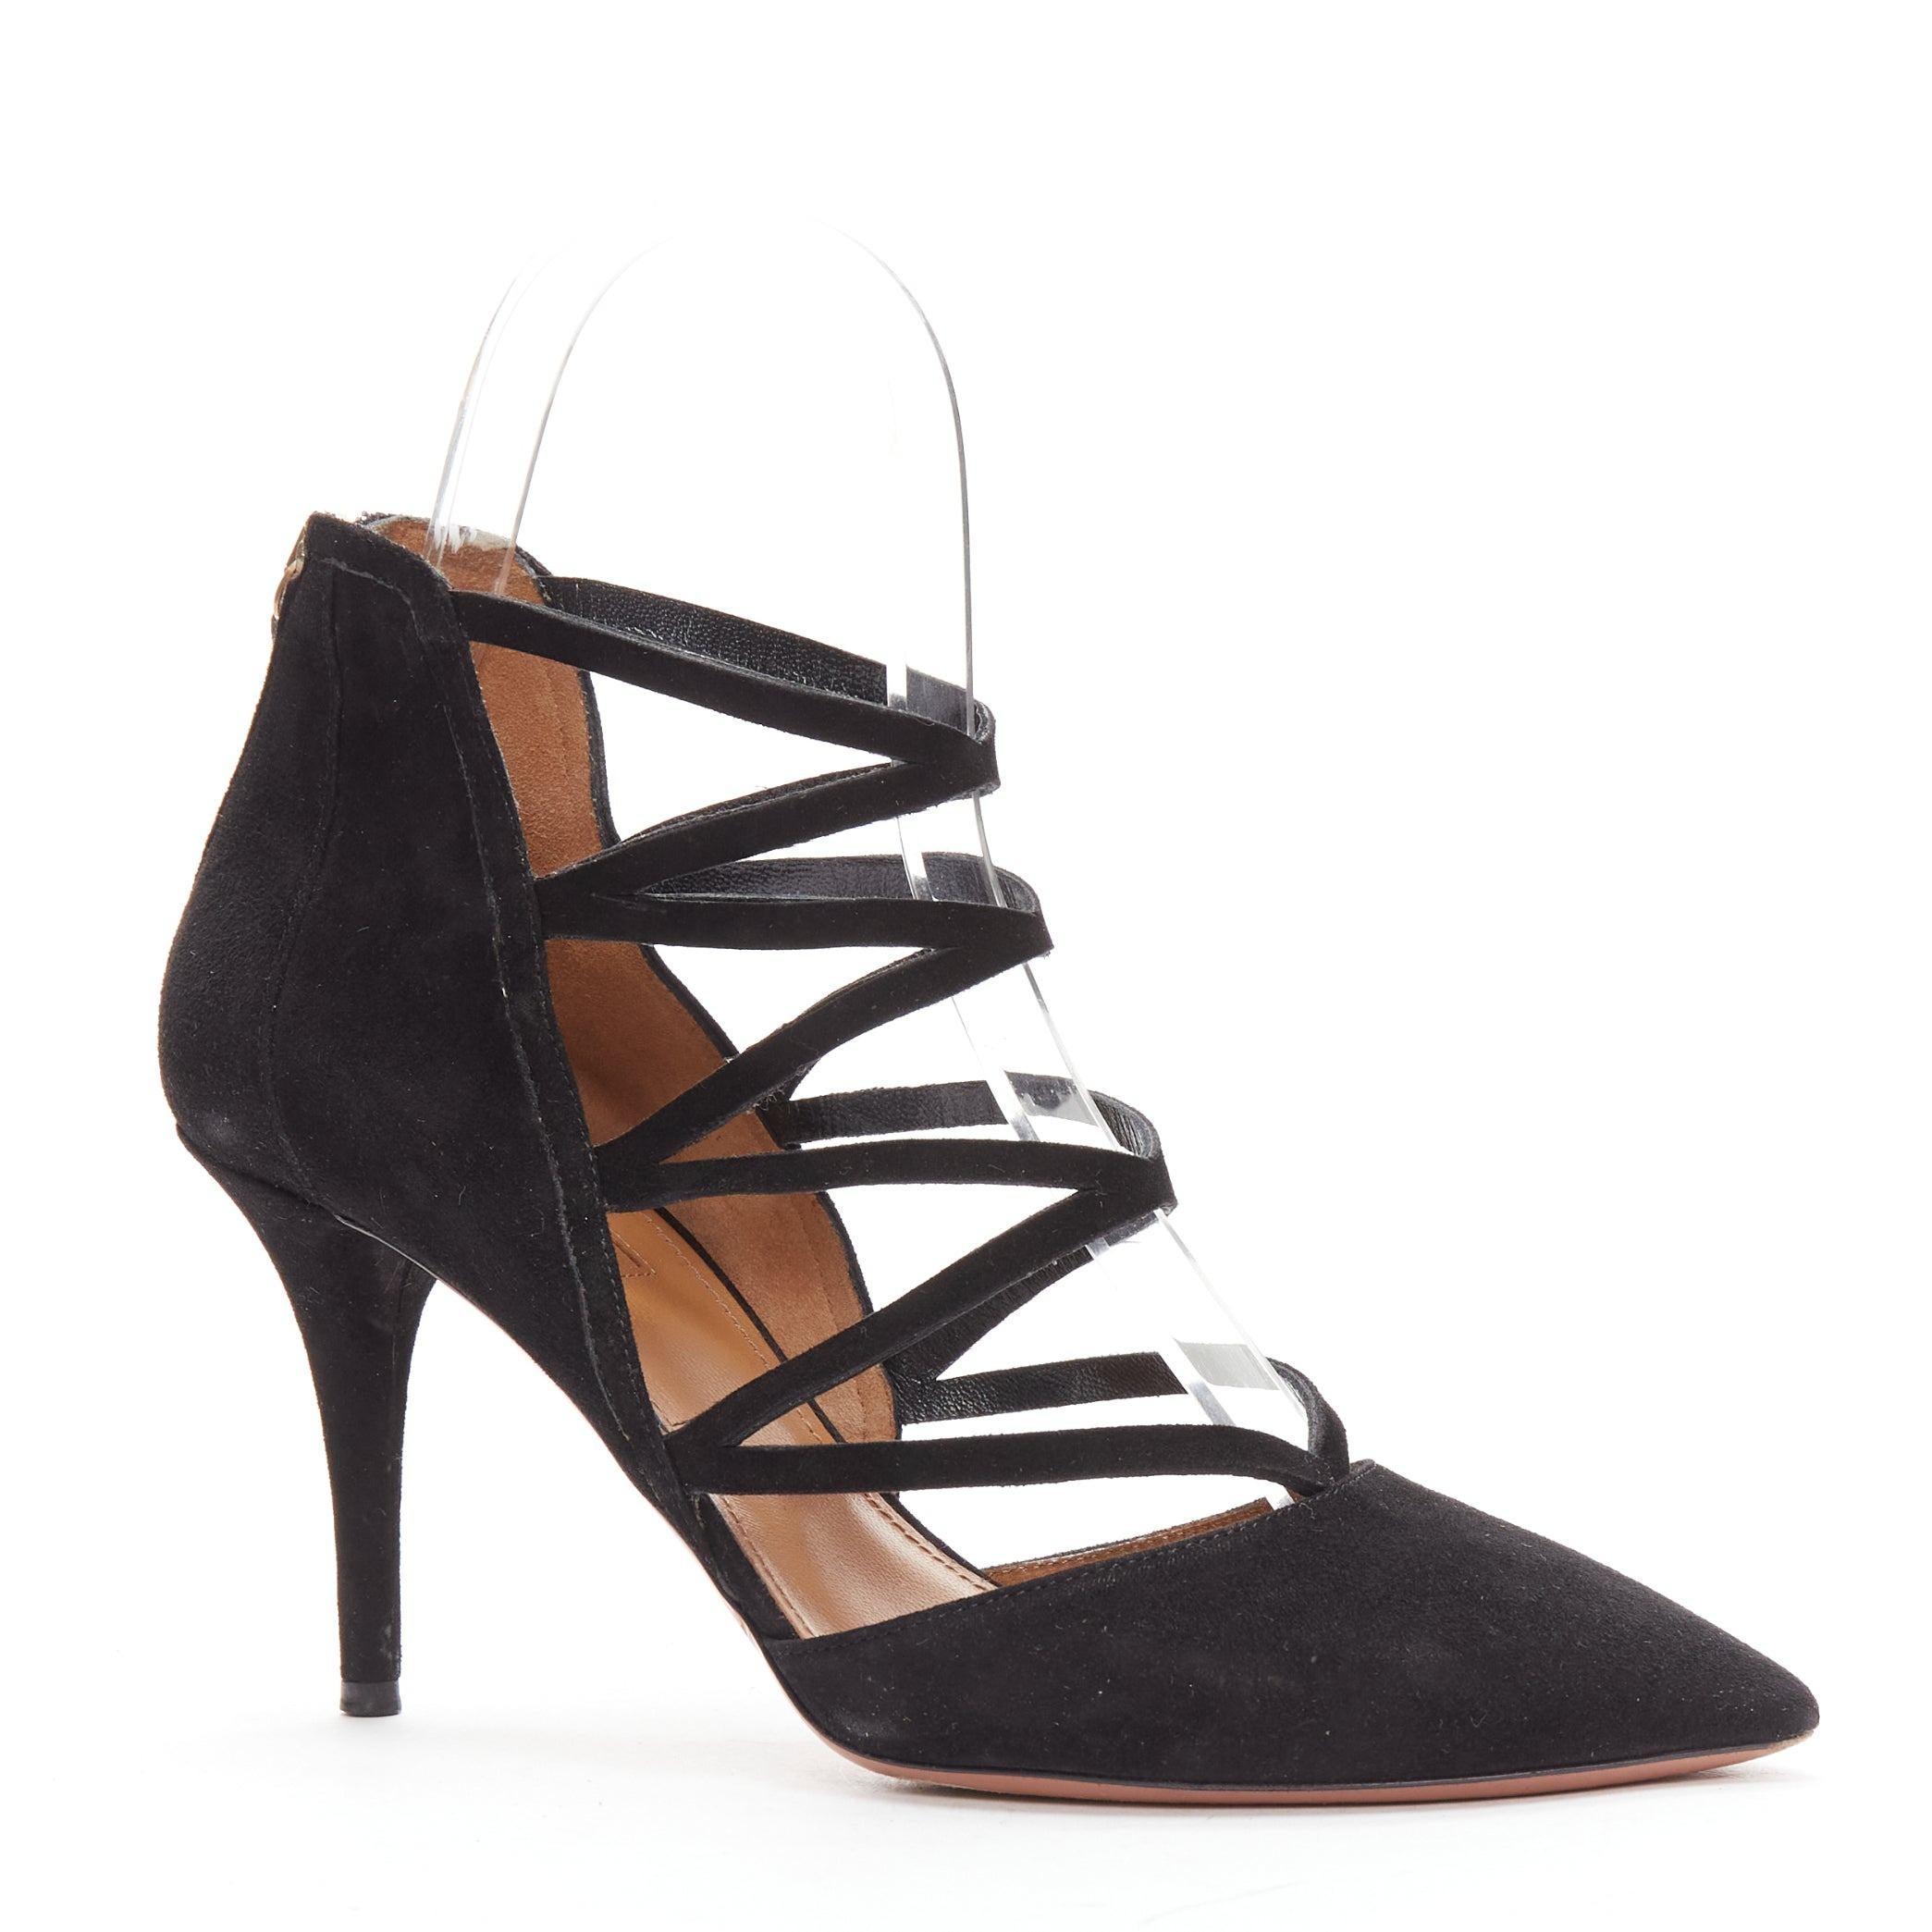 AQUAZZURA Electric black suede criss cross strappy booties pump EU38
Reference: MEKK/A00011
Brand: Aquazzura
Model: Electric
Material: Suede
Color: Black
Pattern: Solid
Closure: Zip
Lining: Nude Leather
Extra Details: Back zip.
Made in: